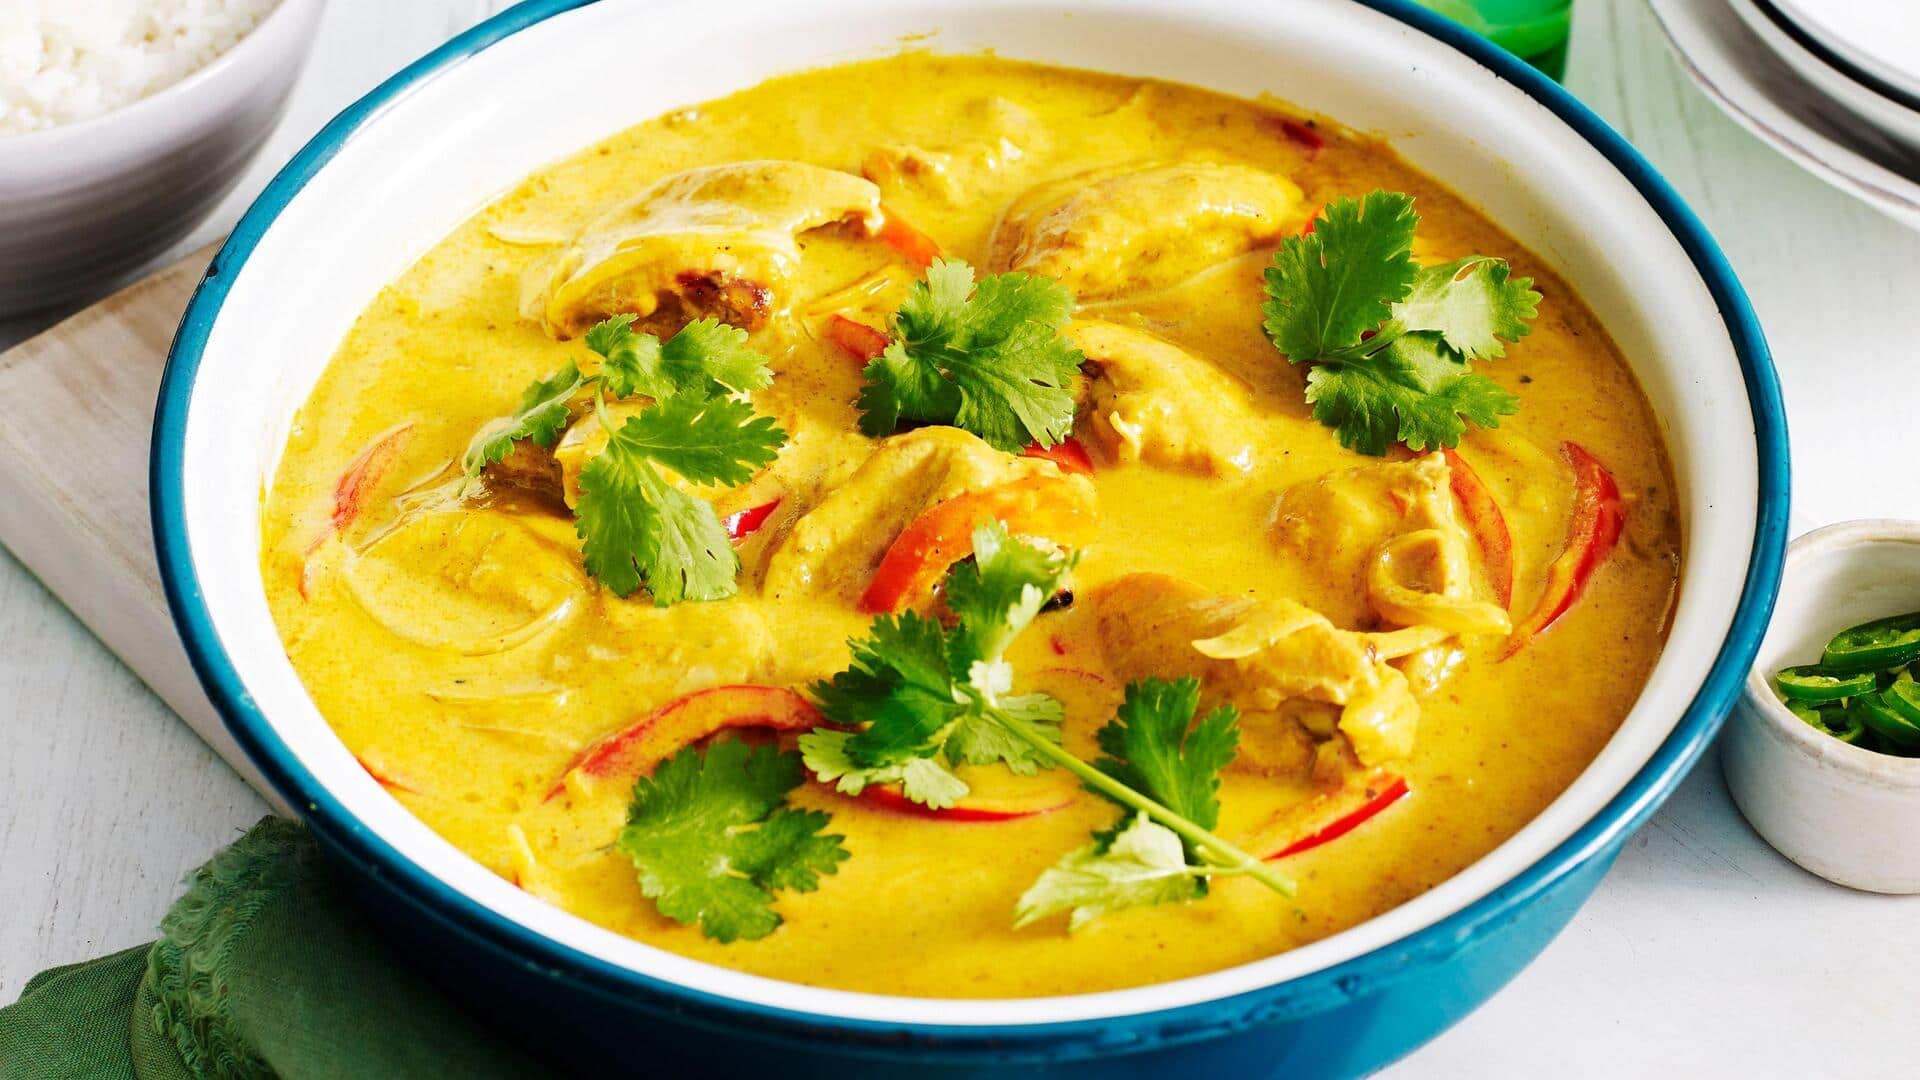 Crafting mango coconut curry: A step-by-step guide